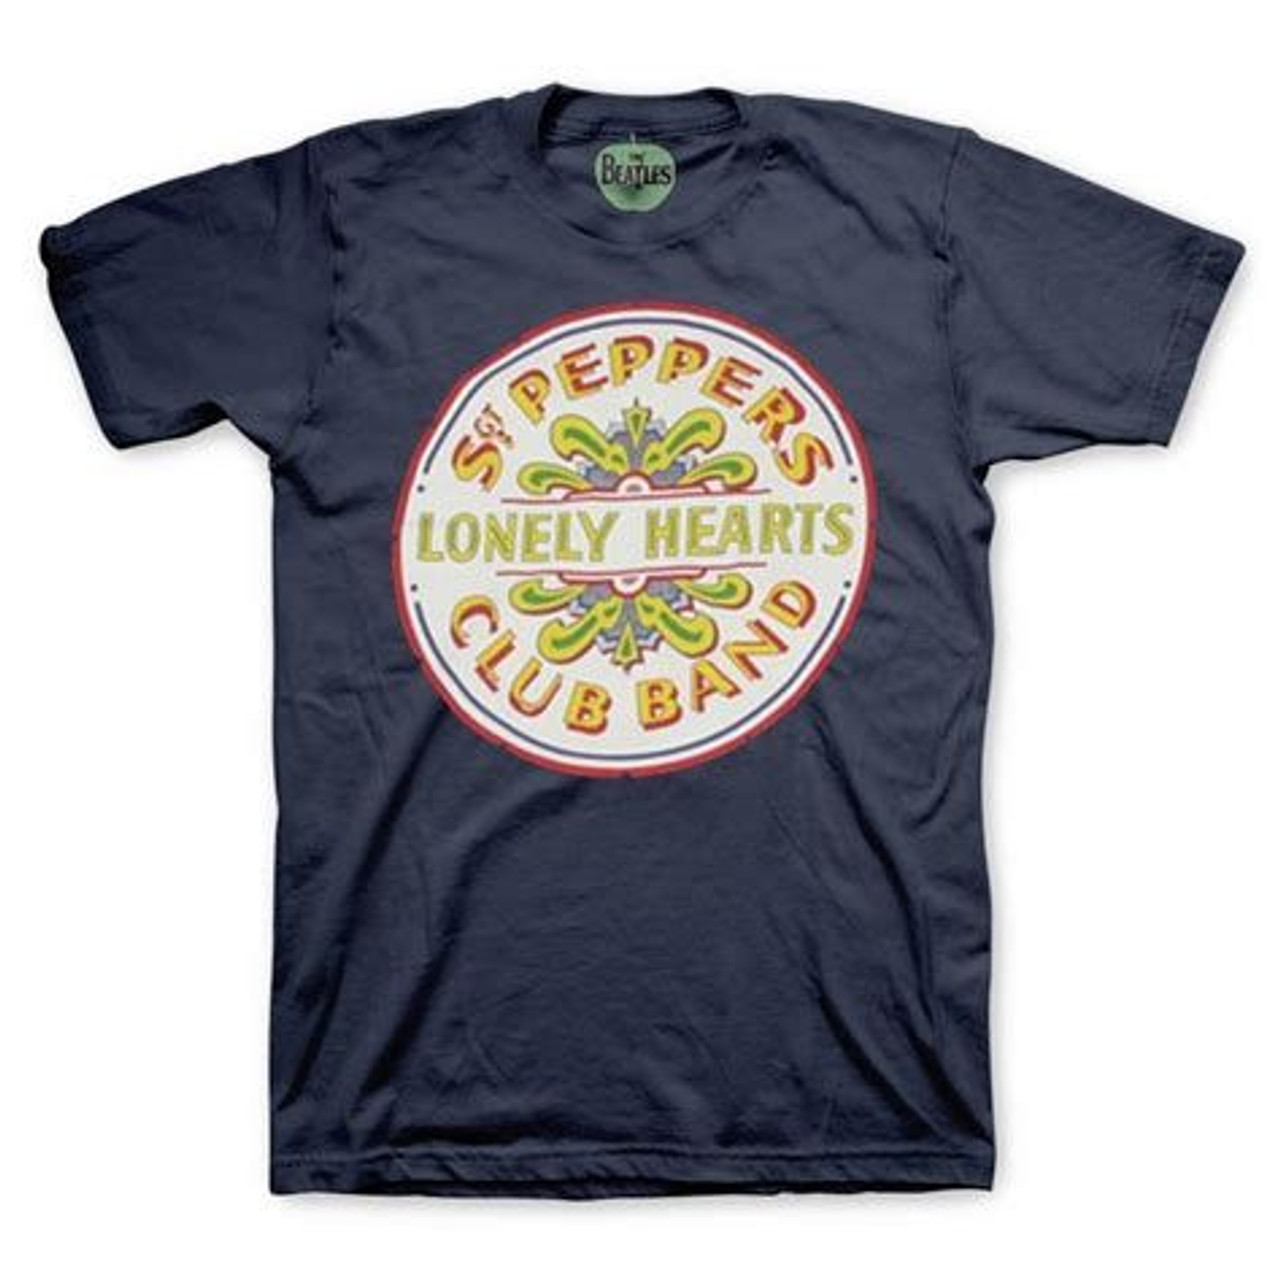 Peppers Tees Sgt. T-shirt Vintage Band The | Buy Seal Beatles design